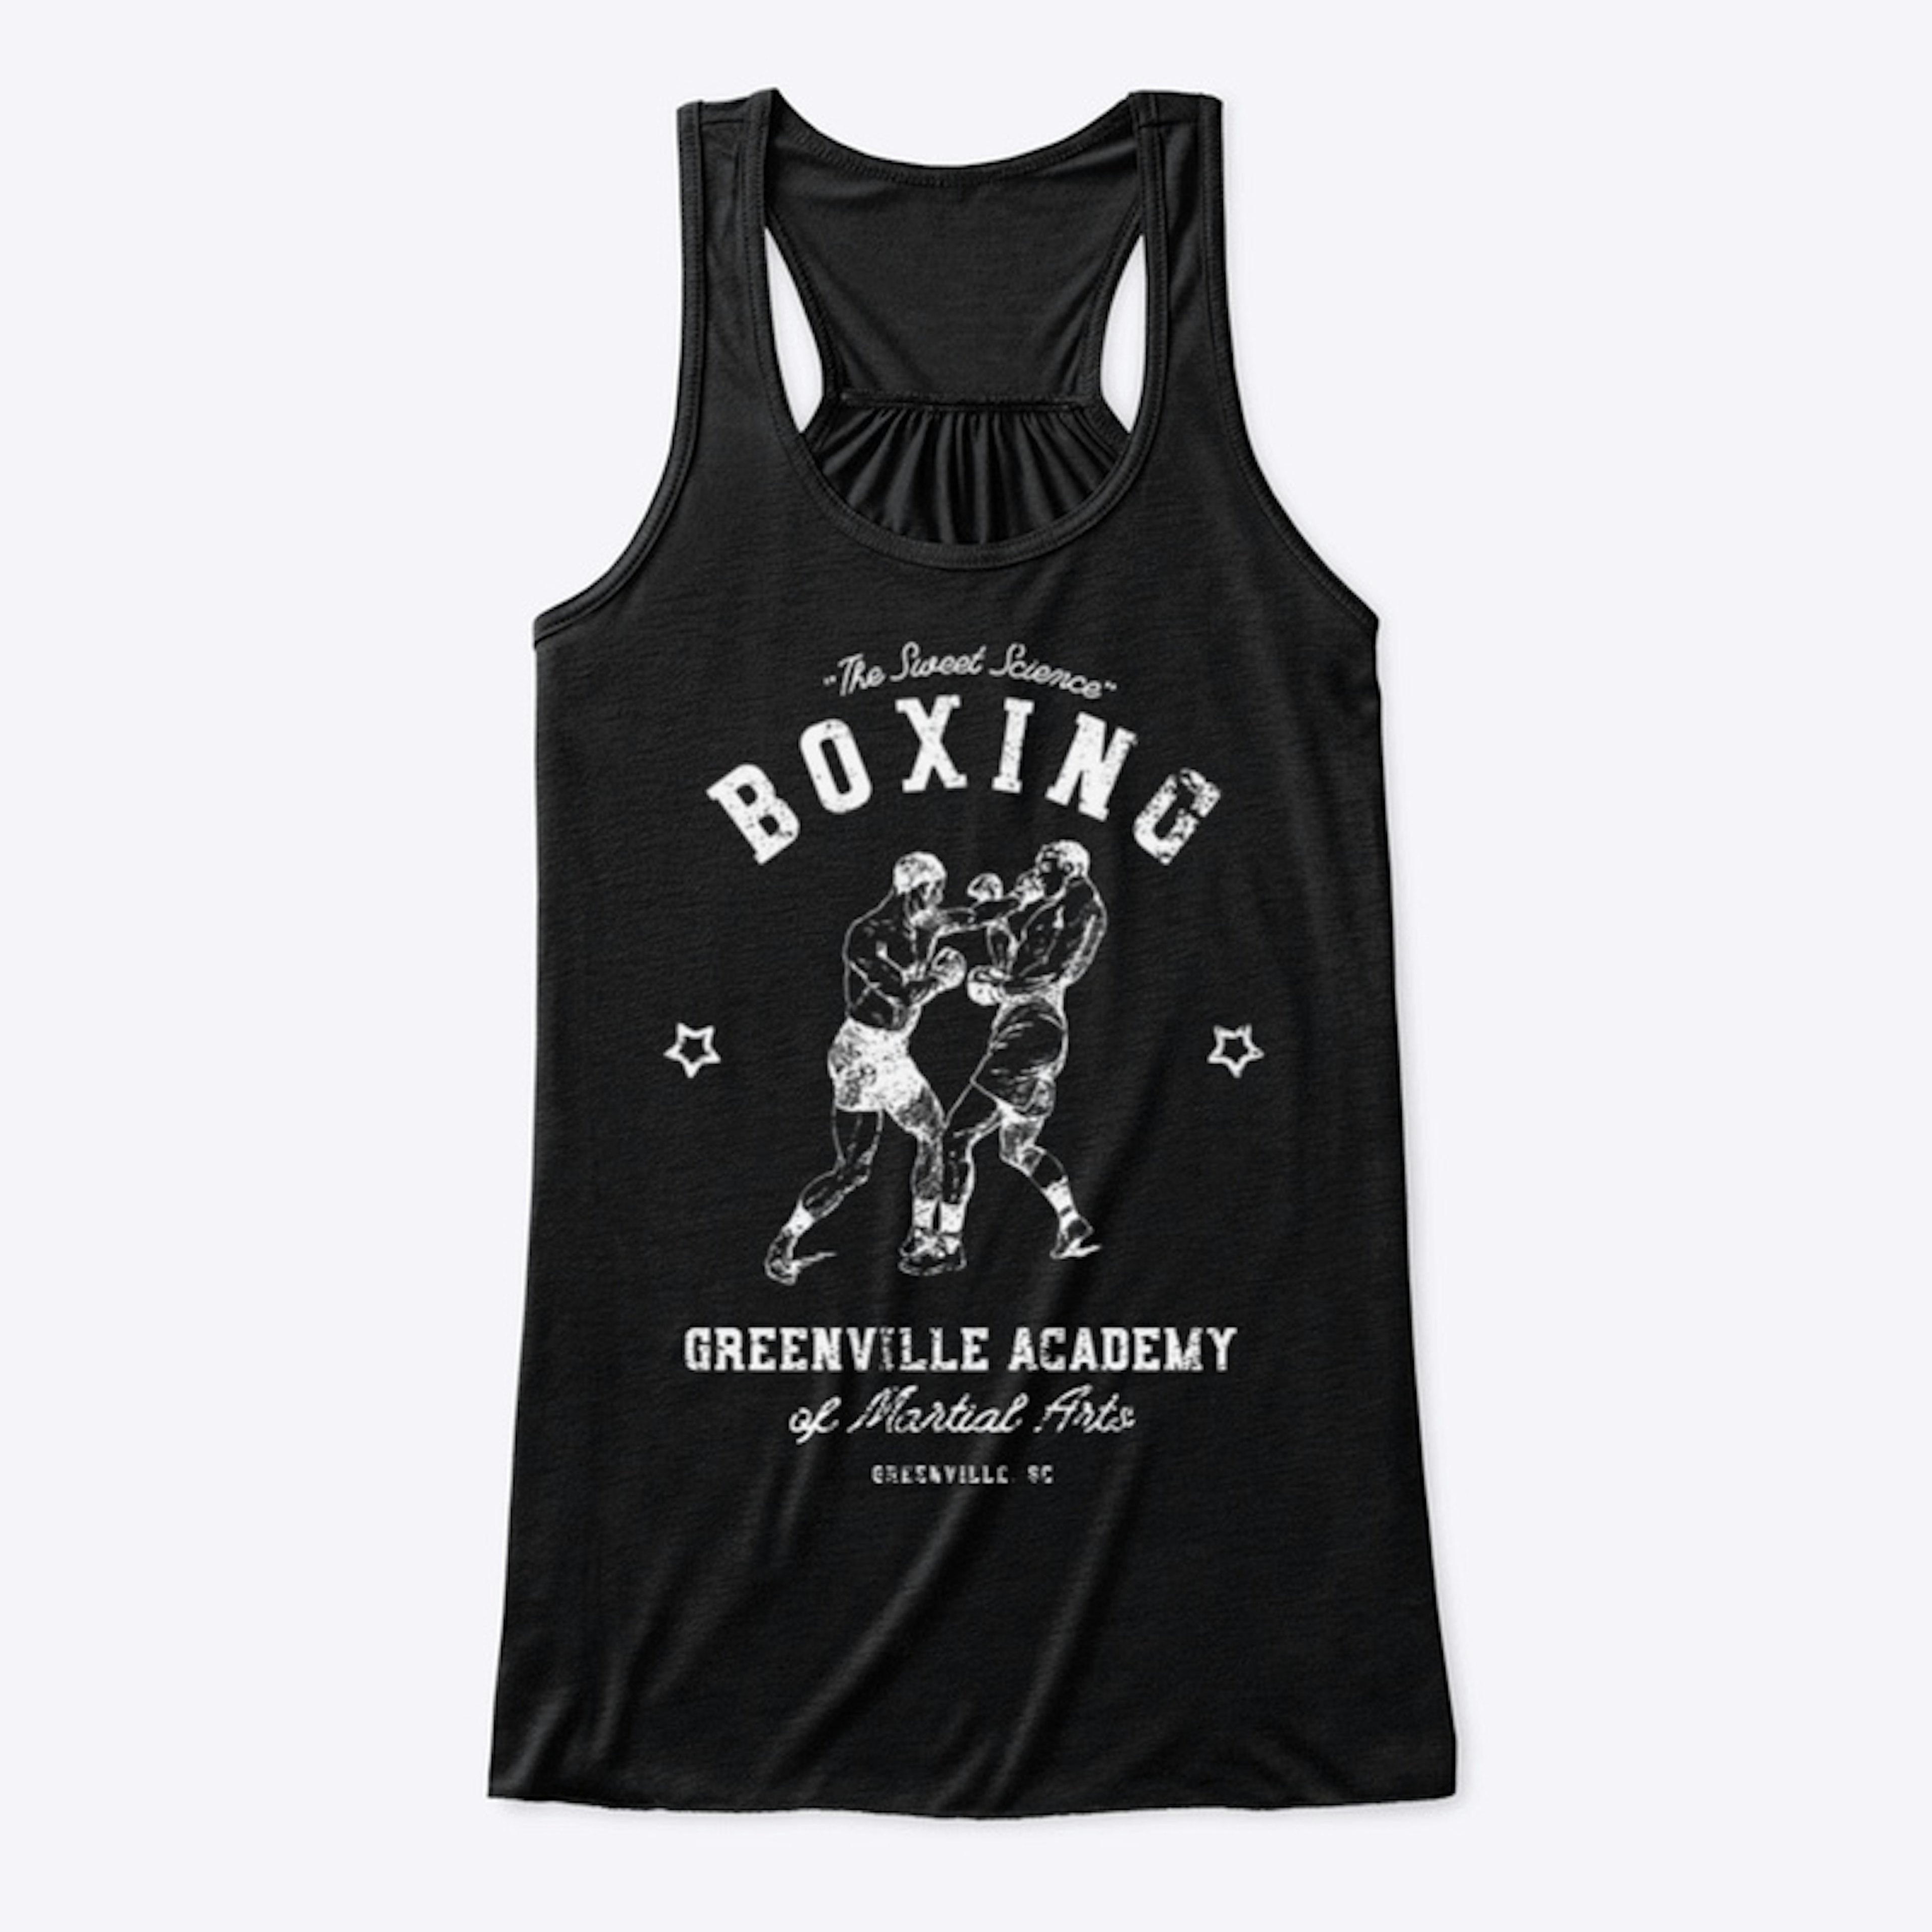 "The Sweet Science" Tank Top